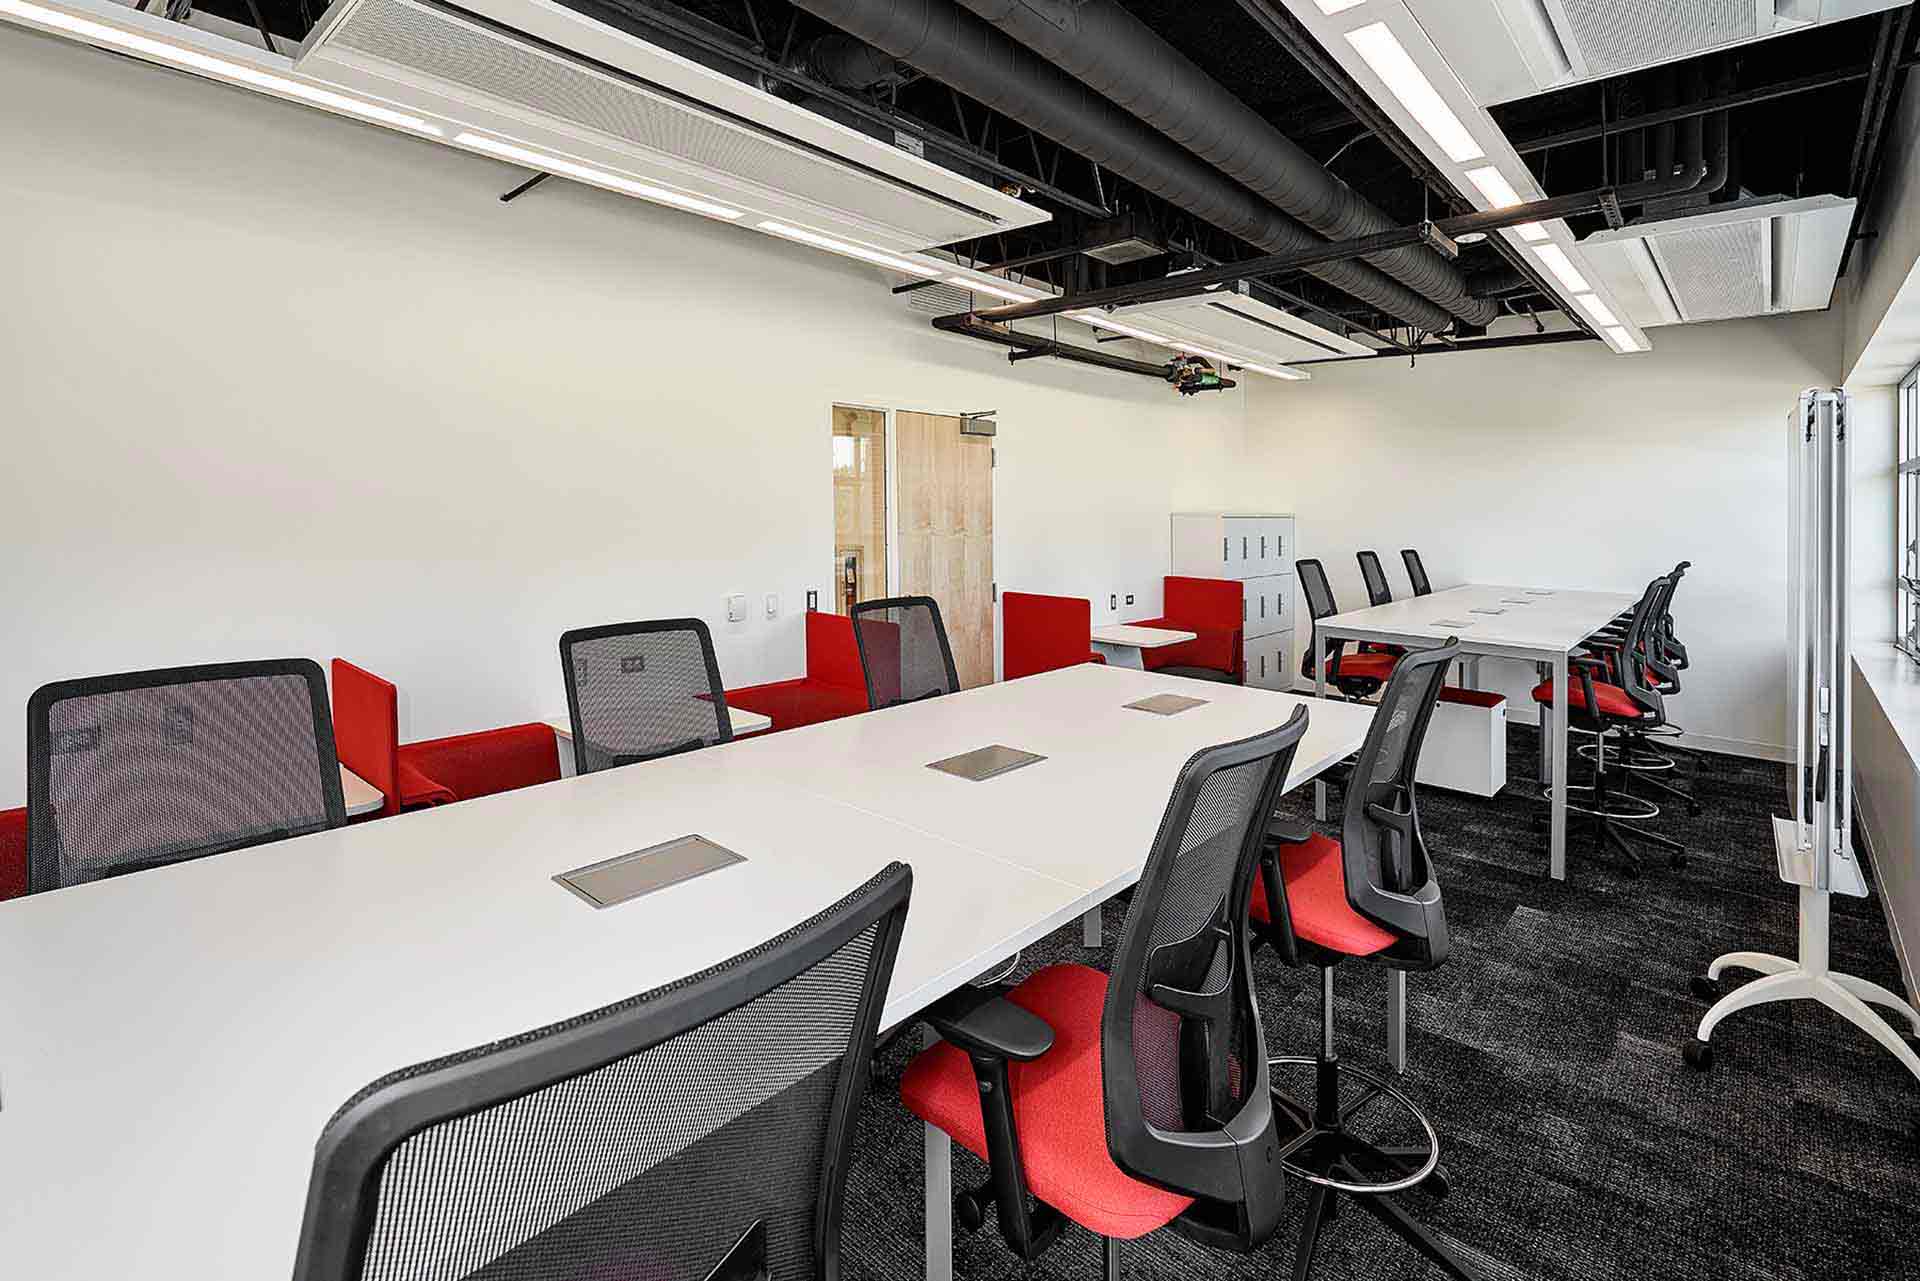 marist-science-wing-room-red-and-black-chairs